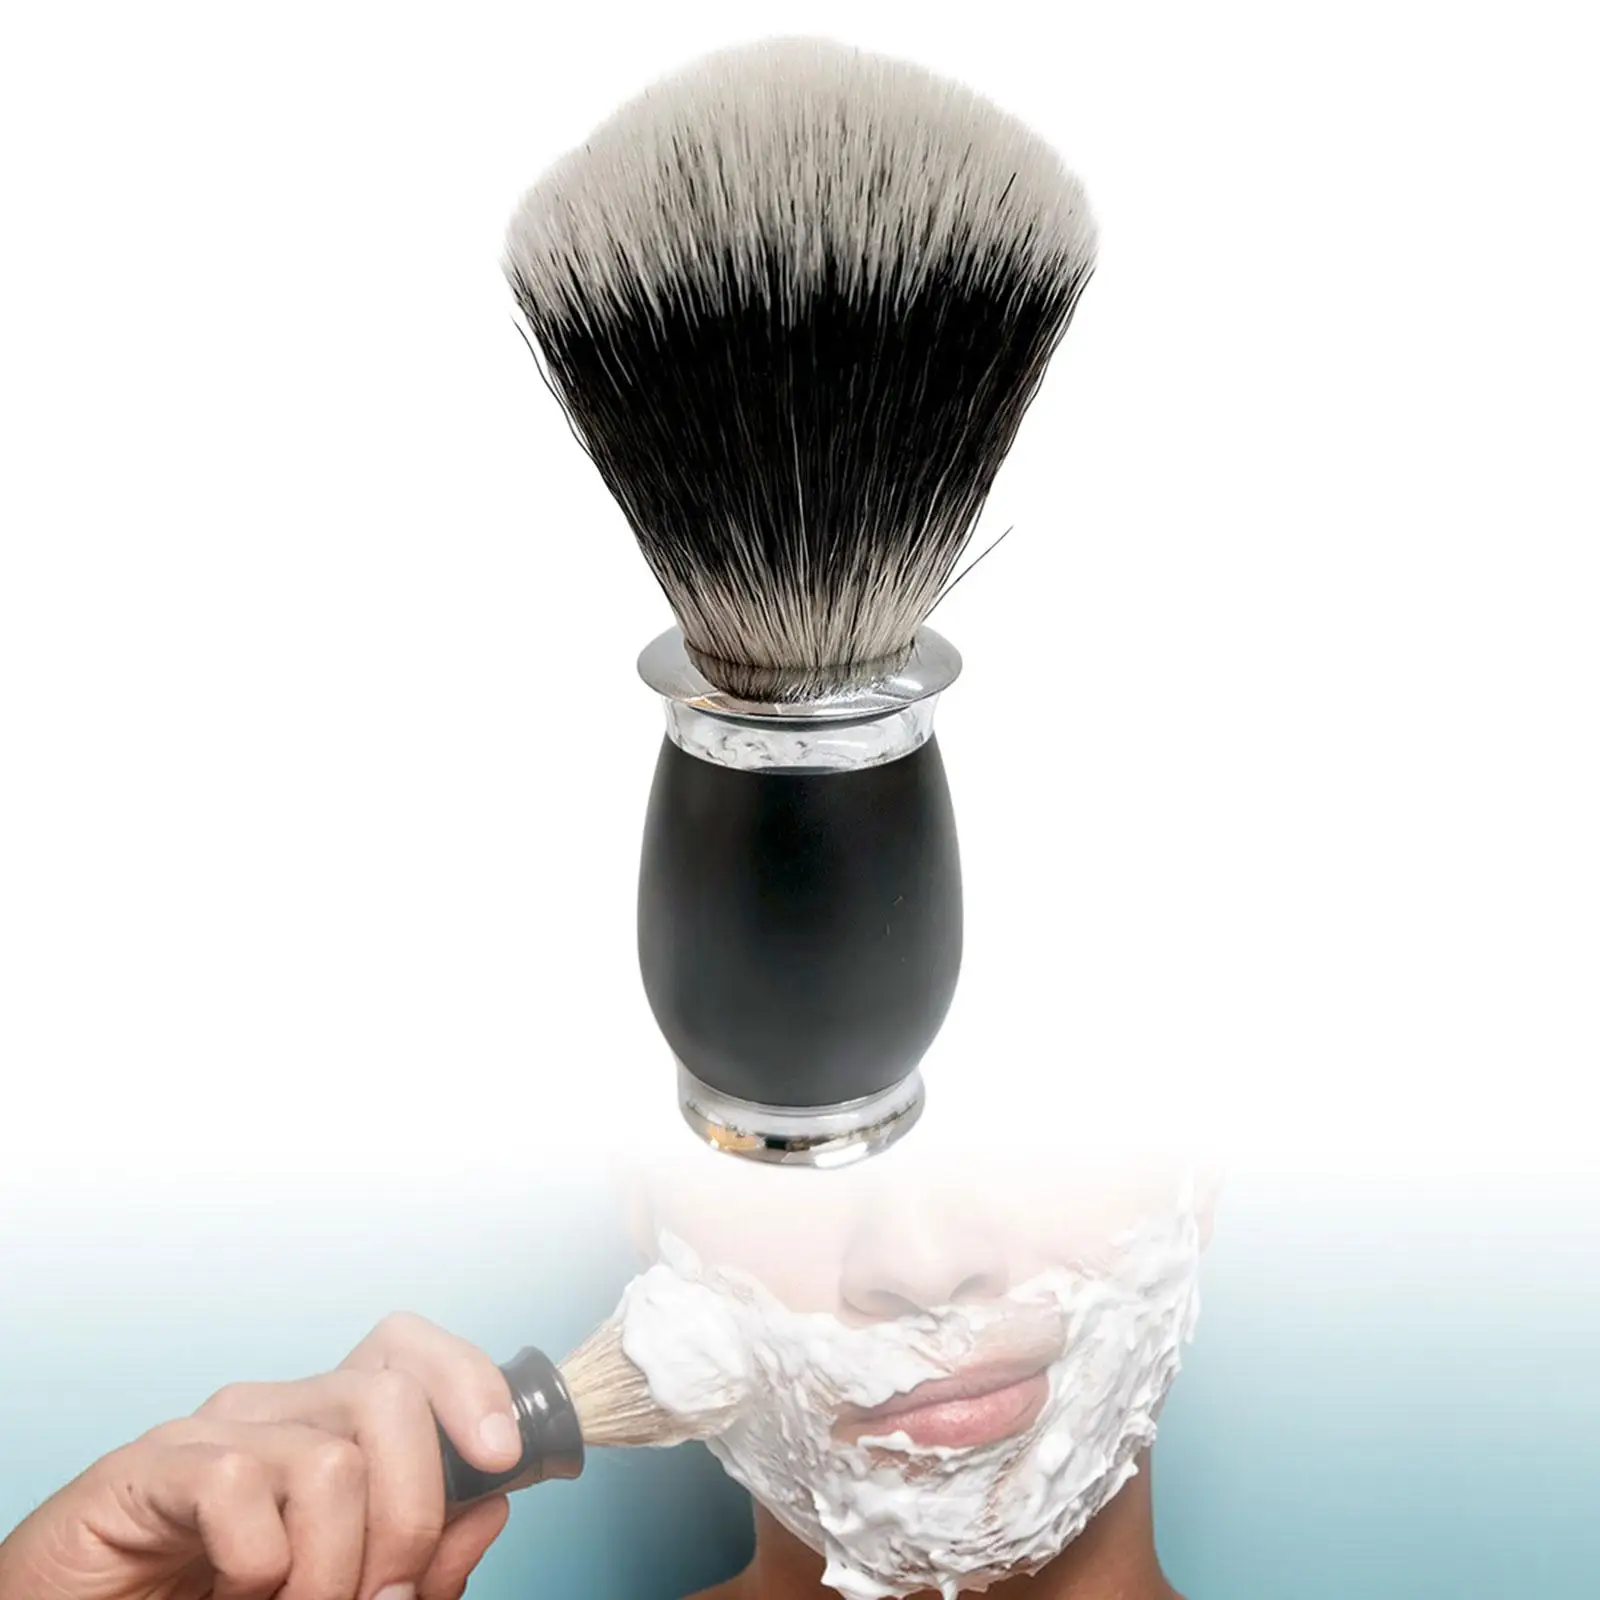 Men Shaving Brush Travel Rich and Fast Lather Shaving Cream Classic Handmade Beard Cleaning for Professional Barber Salon Tools